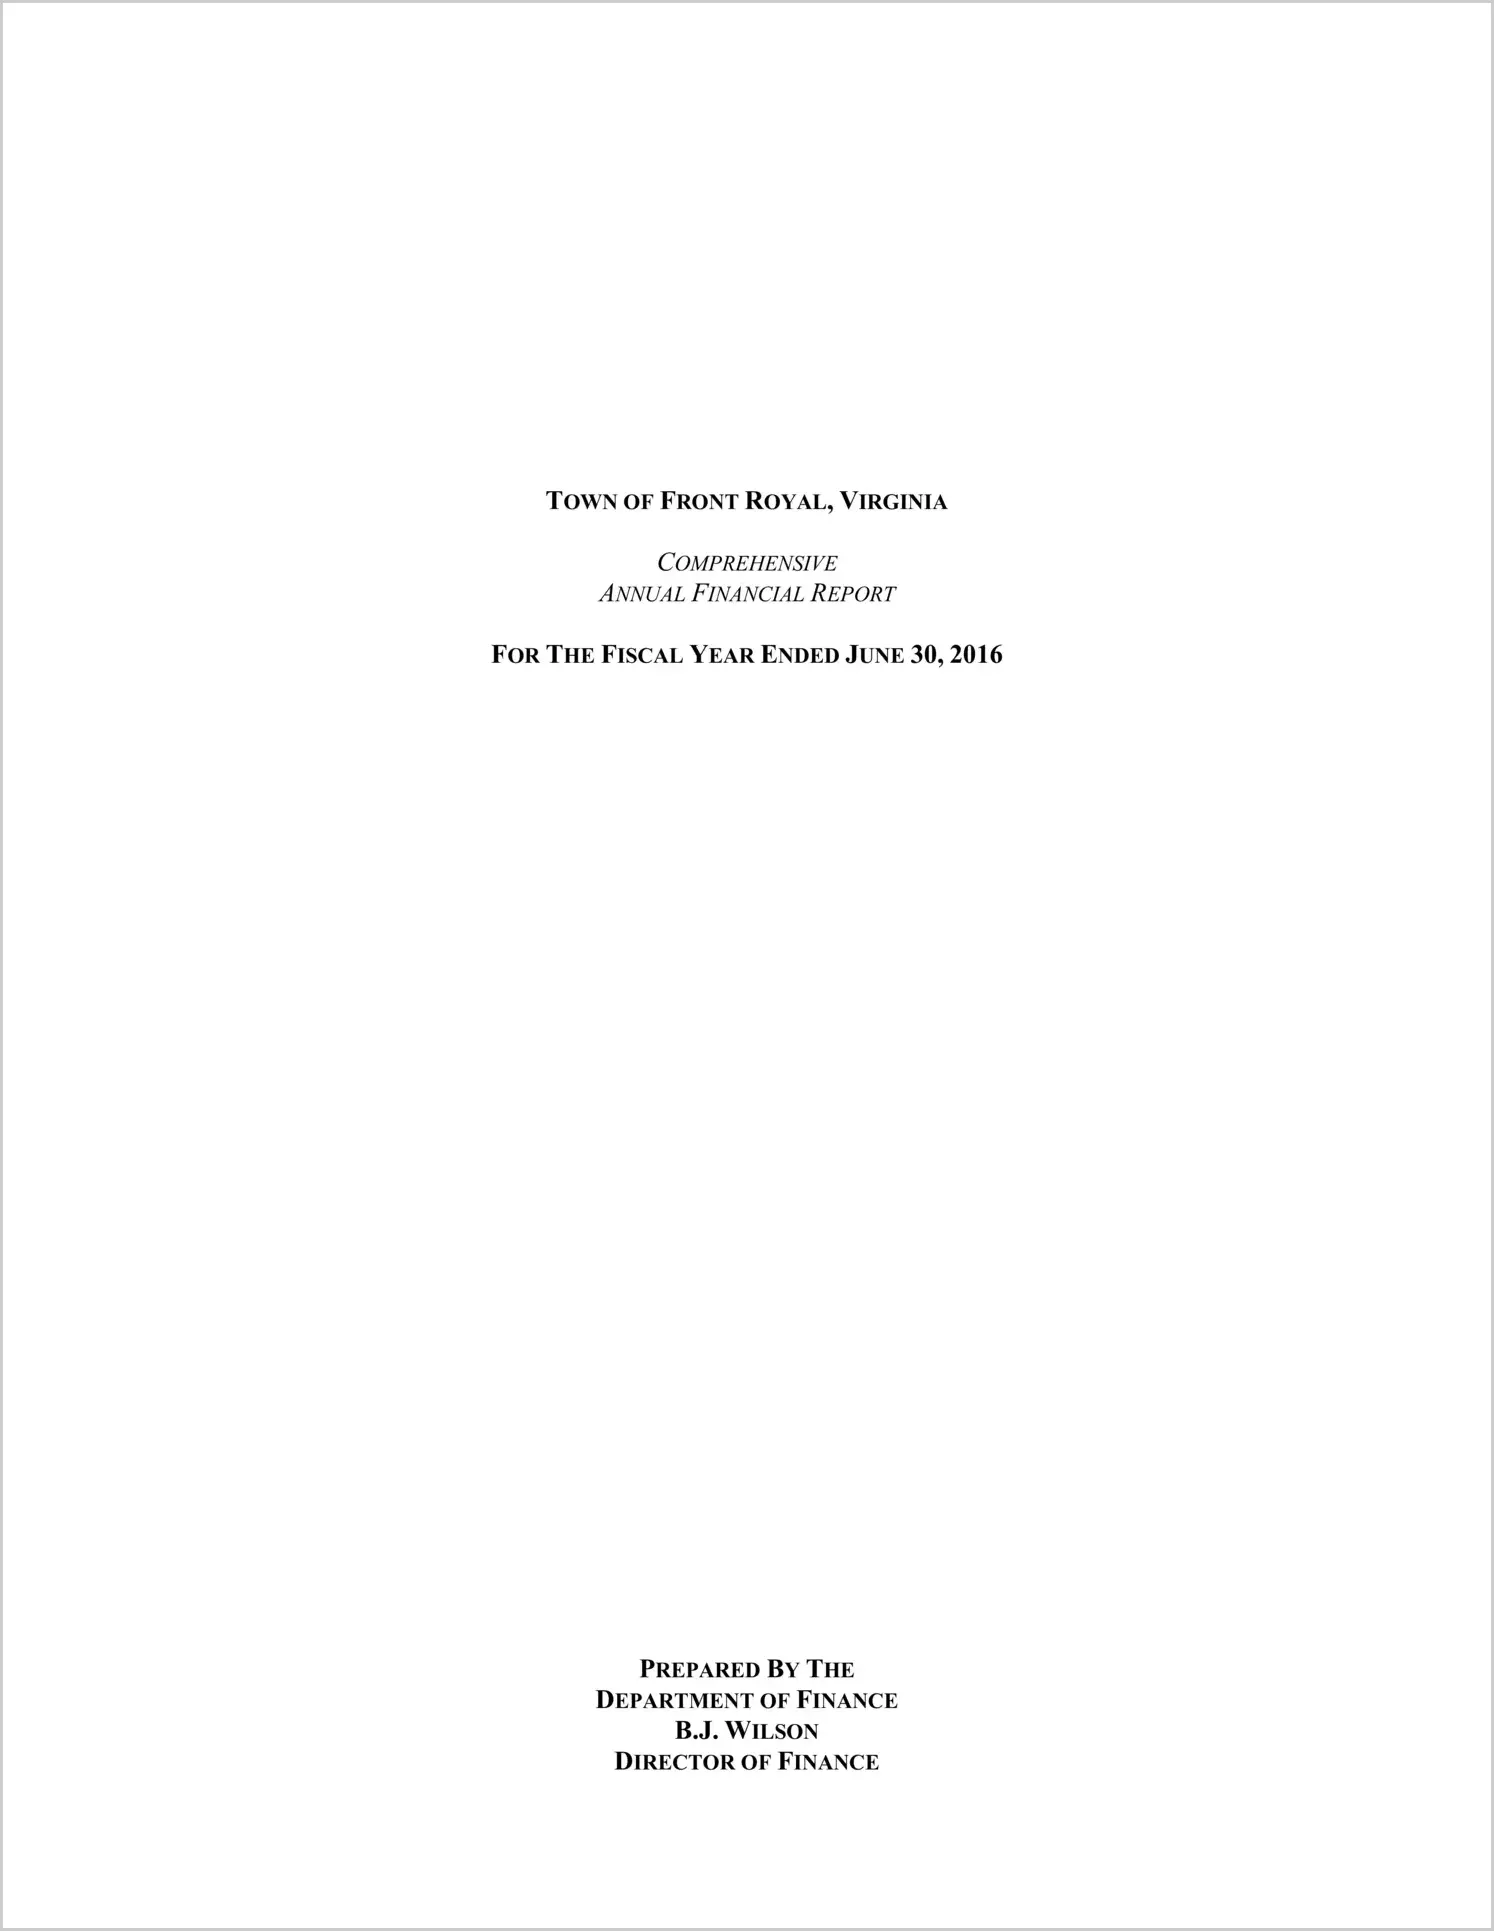 2016 Annual Financial Report for Town of Front Royal